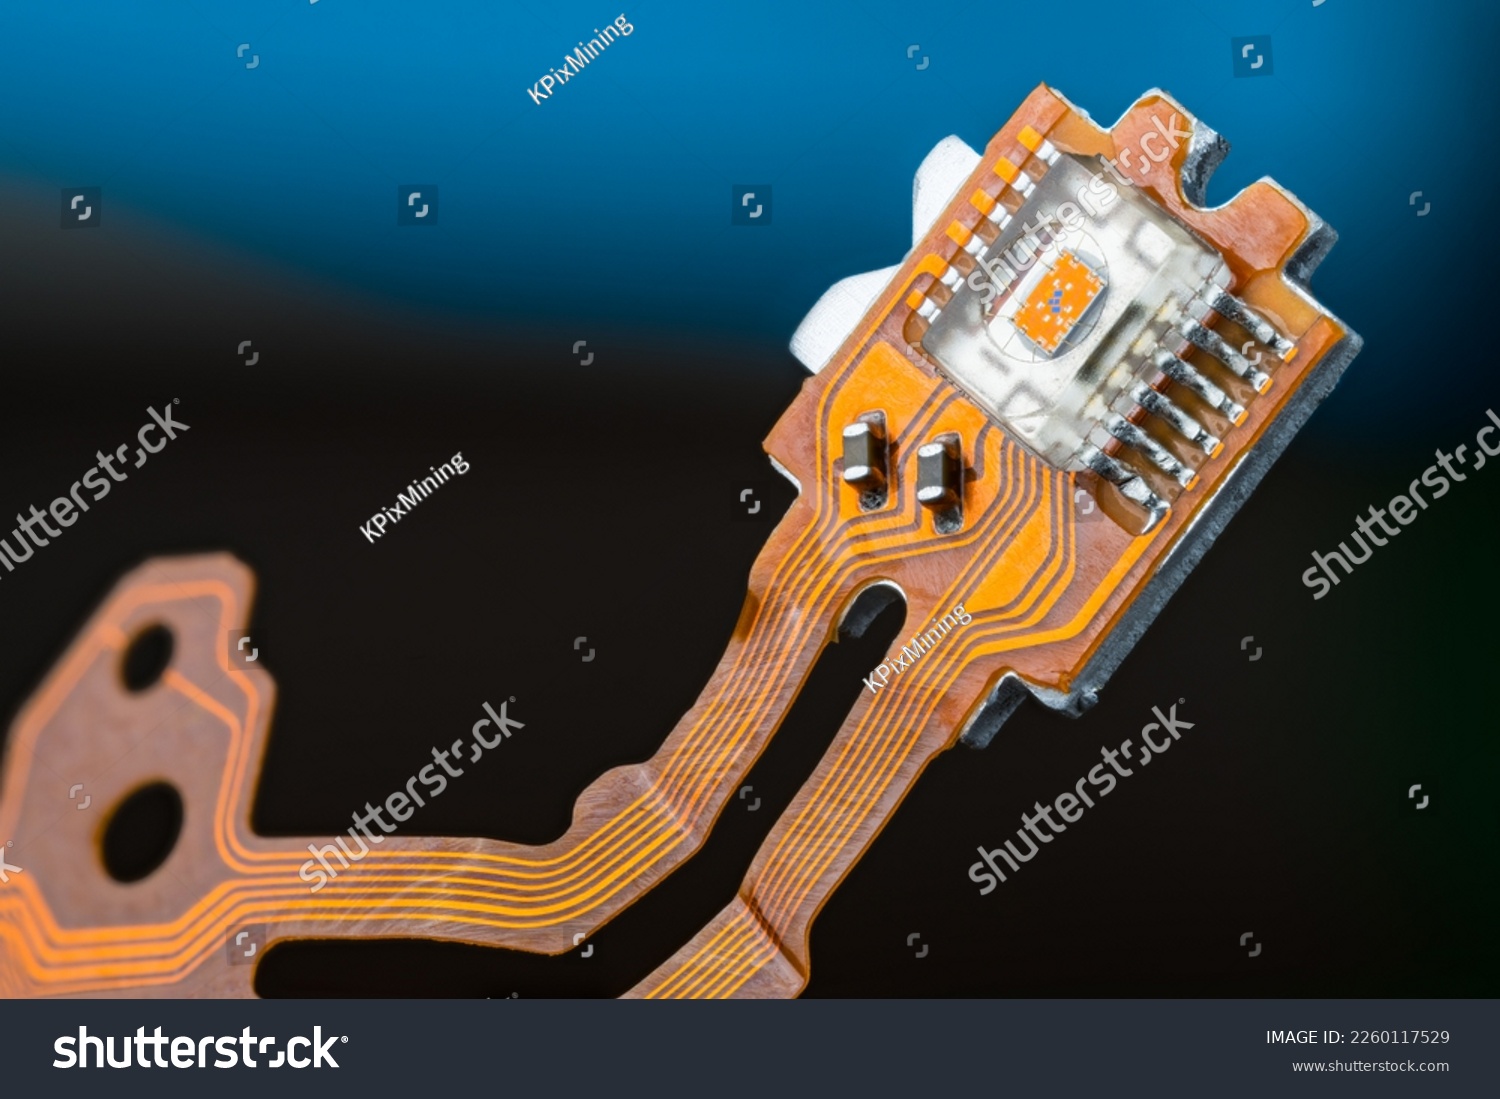 Closeup of optical sensor on electronic printed circuit board and flex ribbon cables on dark blue background. Small orange die in transparent micro chip on PCB of dismantled digital CD-DVD disc drive. #2260117529